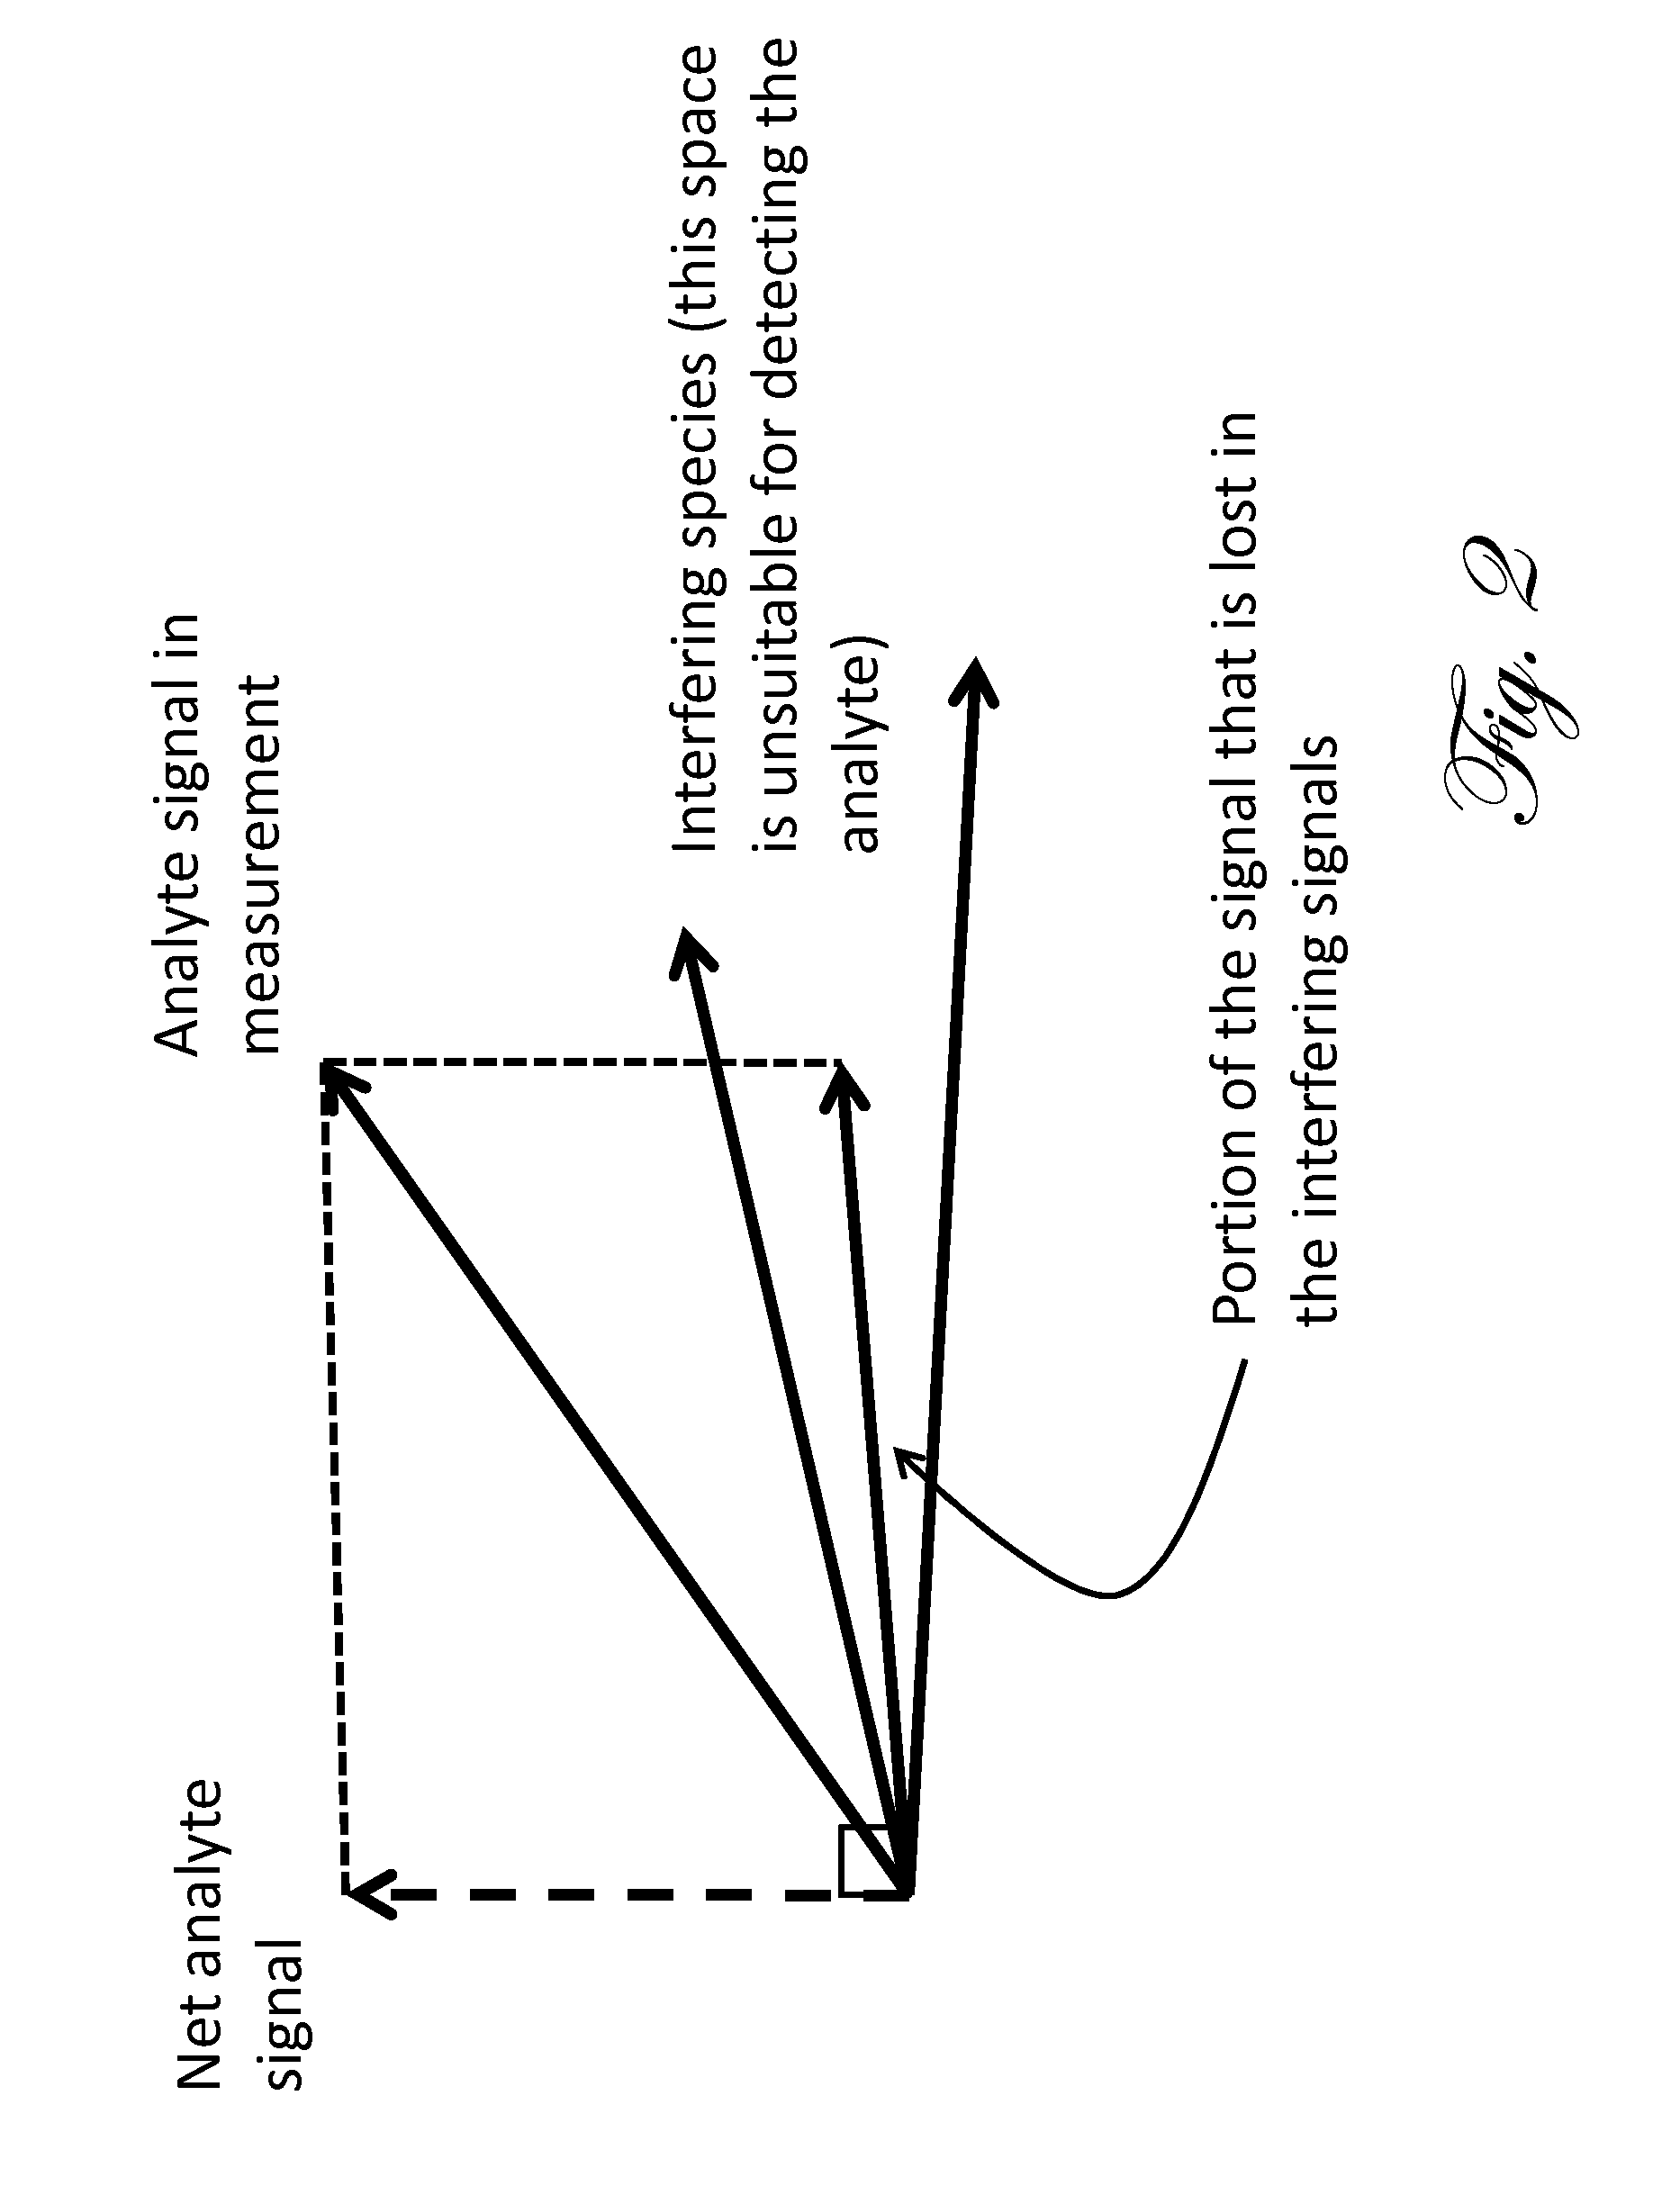 System for noninvasive determination of alcohol in tissue